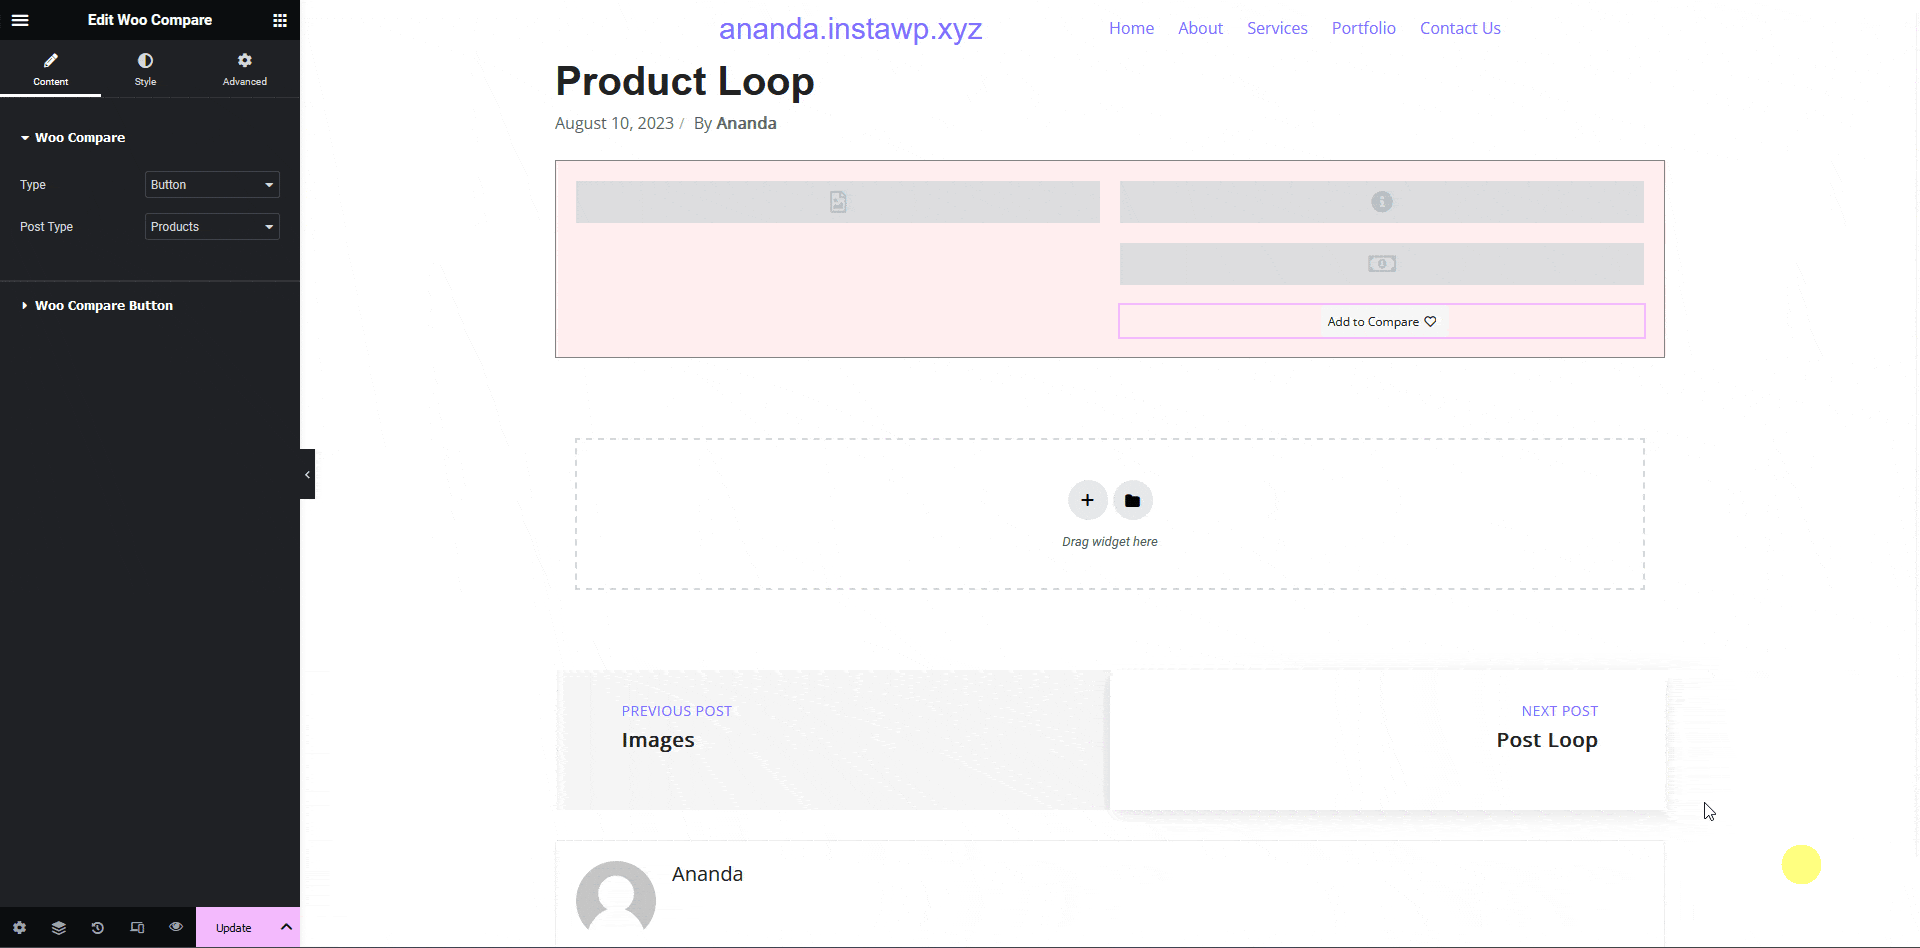 Woo compare type button how to add product compare button to a custom woocommerce product skin in elementor? From the plus addons for elementor